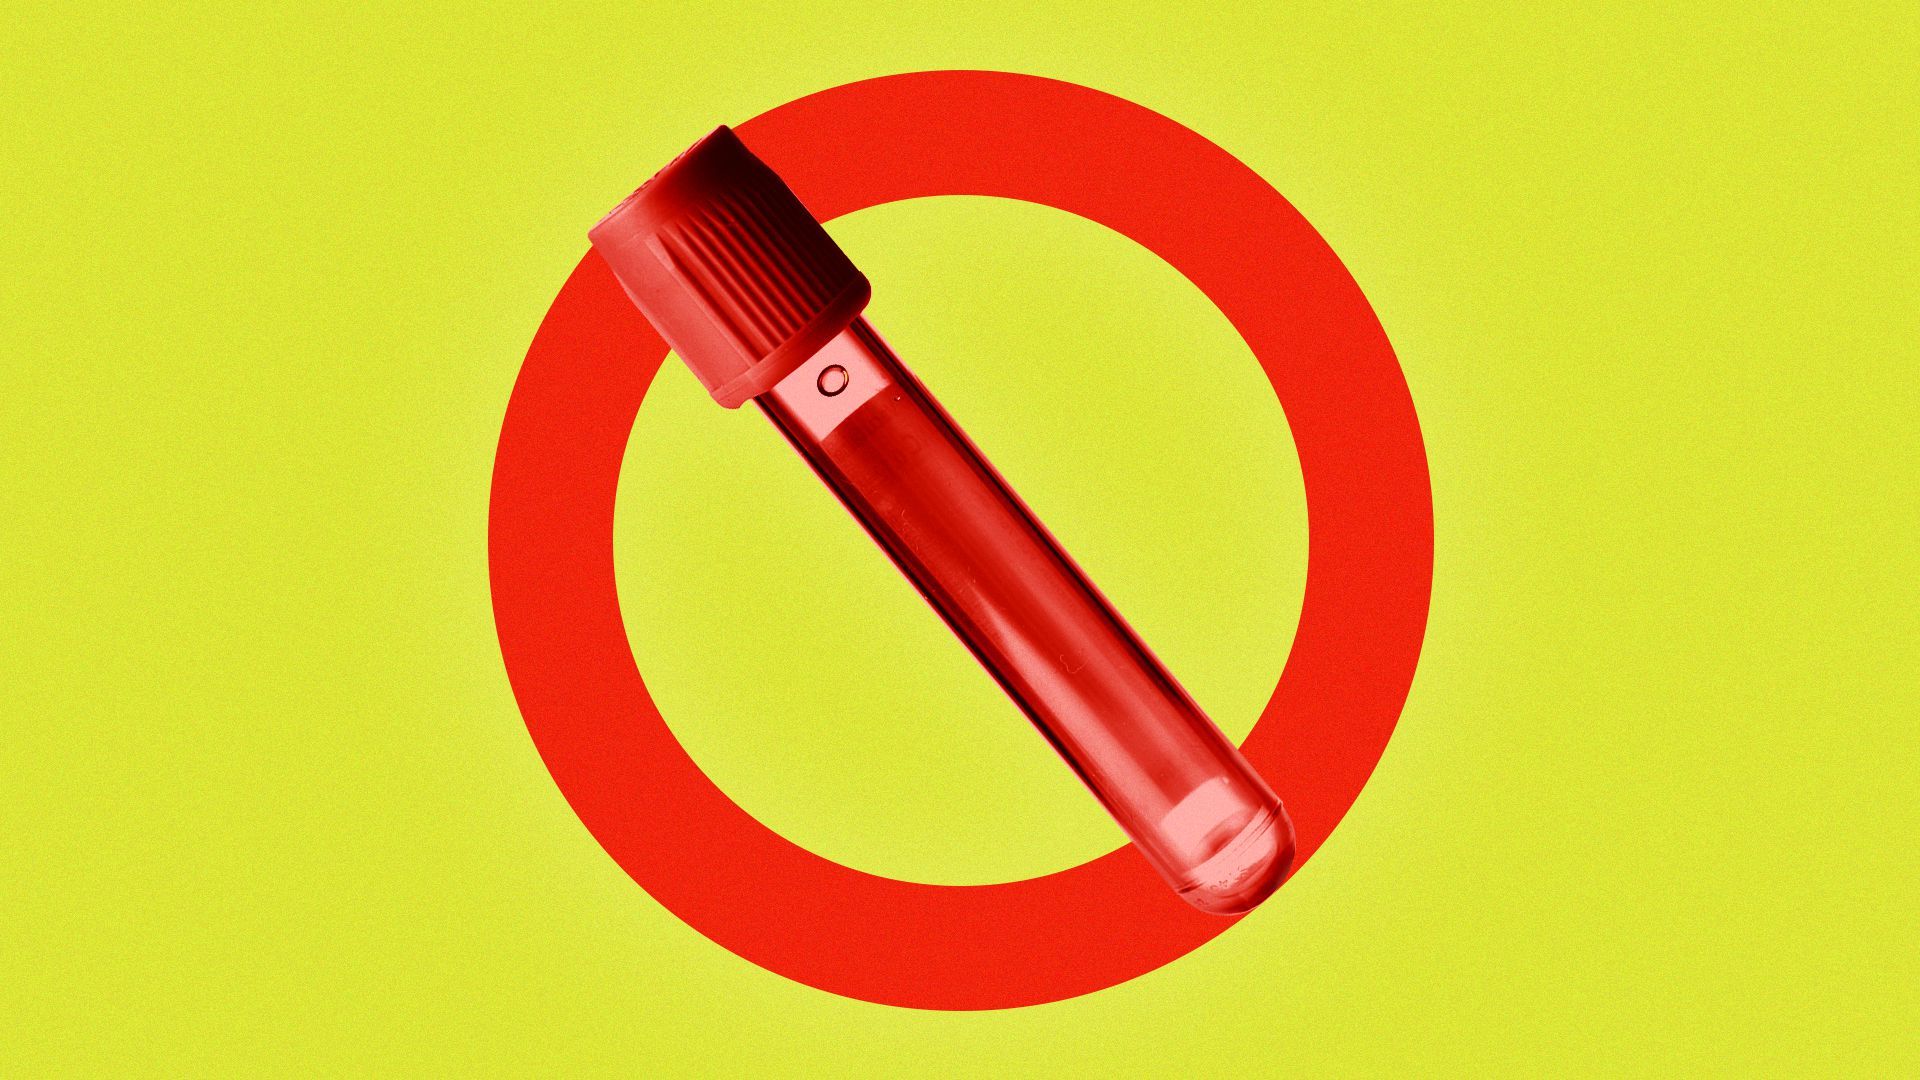 Illustration of a no symbol with a test tube as the cross.